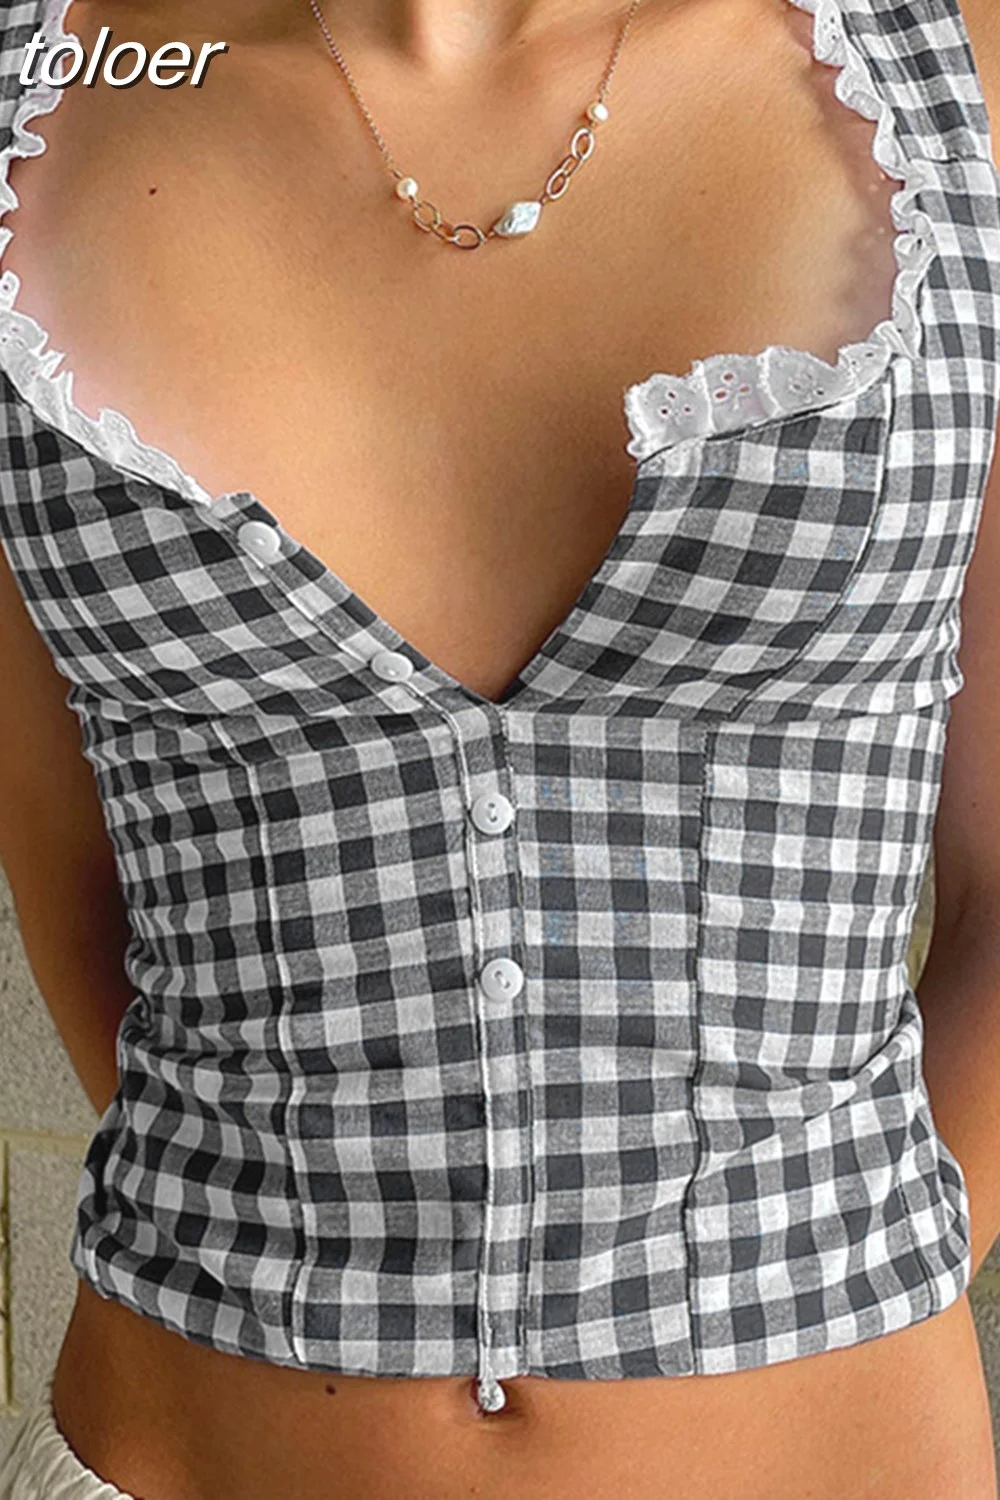 toloer Gingham Crop Tops Summer Y2k Clothes Women Lace Trim Button Up Square Neck Backless Tank Top Cute Girls P33-BG10